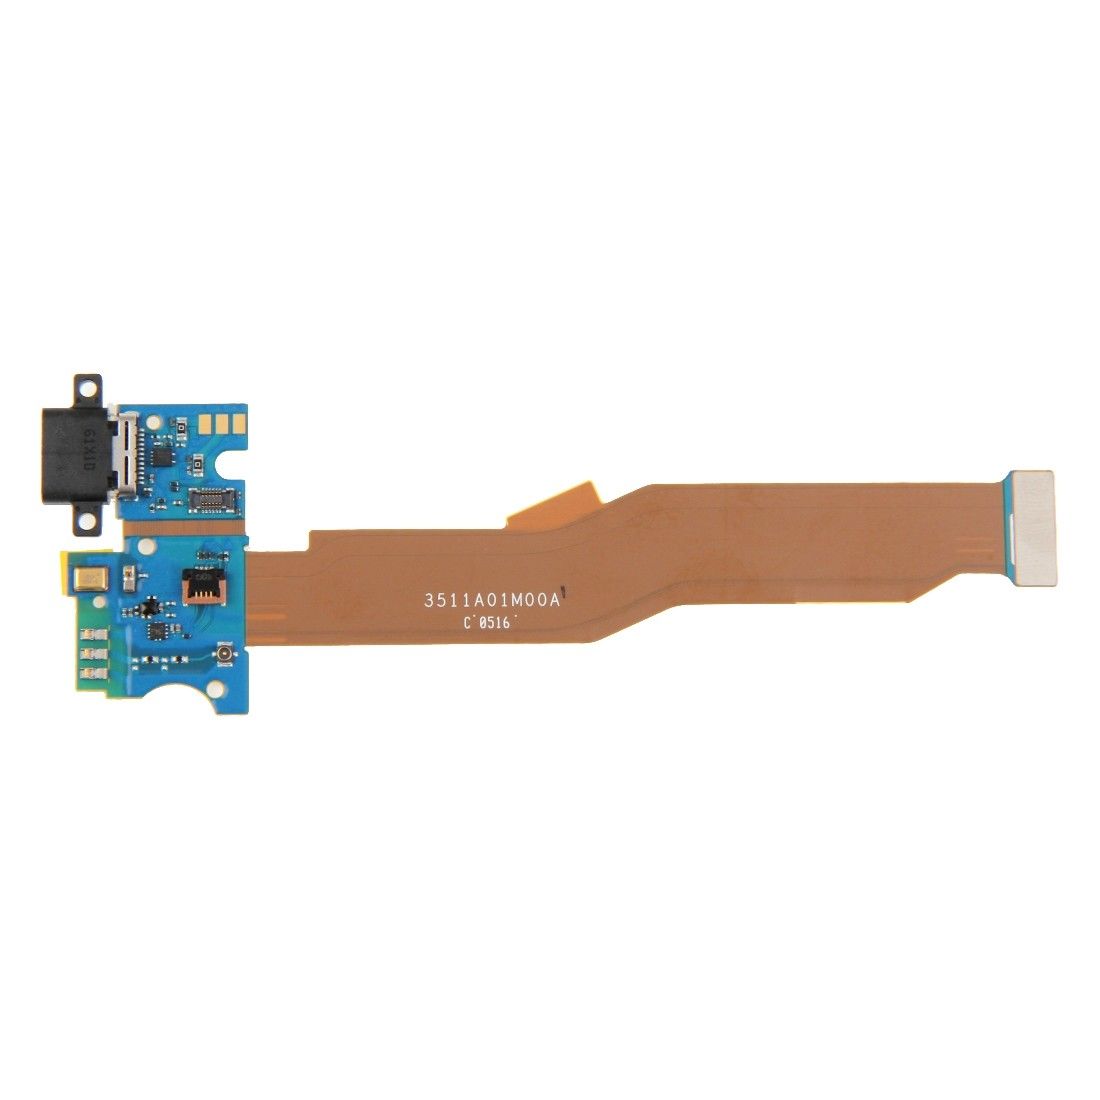 Xiaomi Mi 5 Type-C Charging Port Flex Cable for [product_price] - First Help Tech